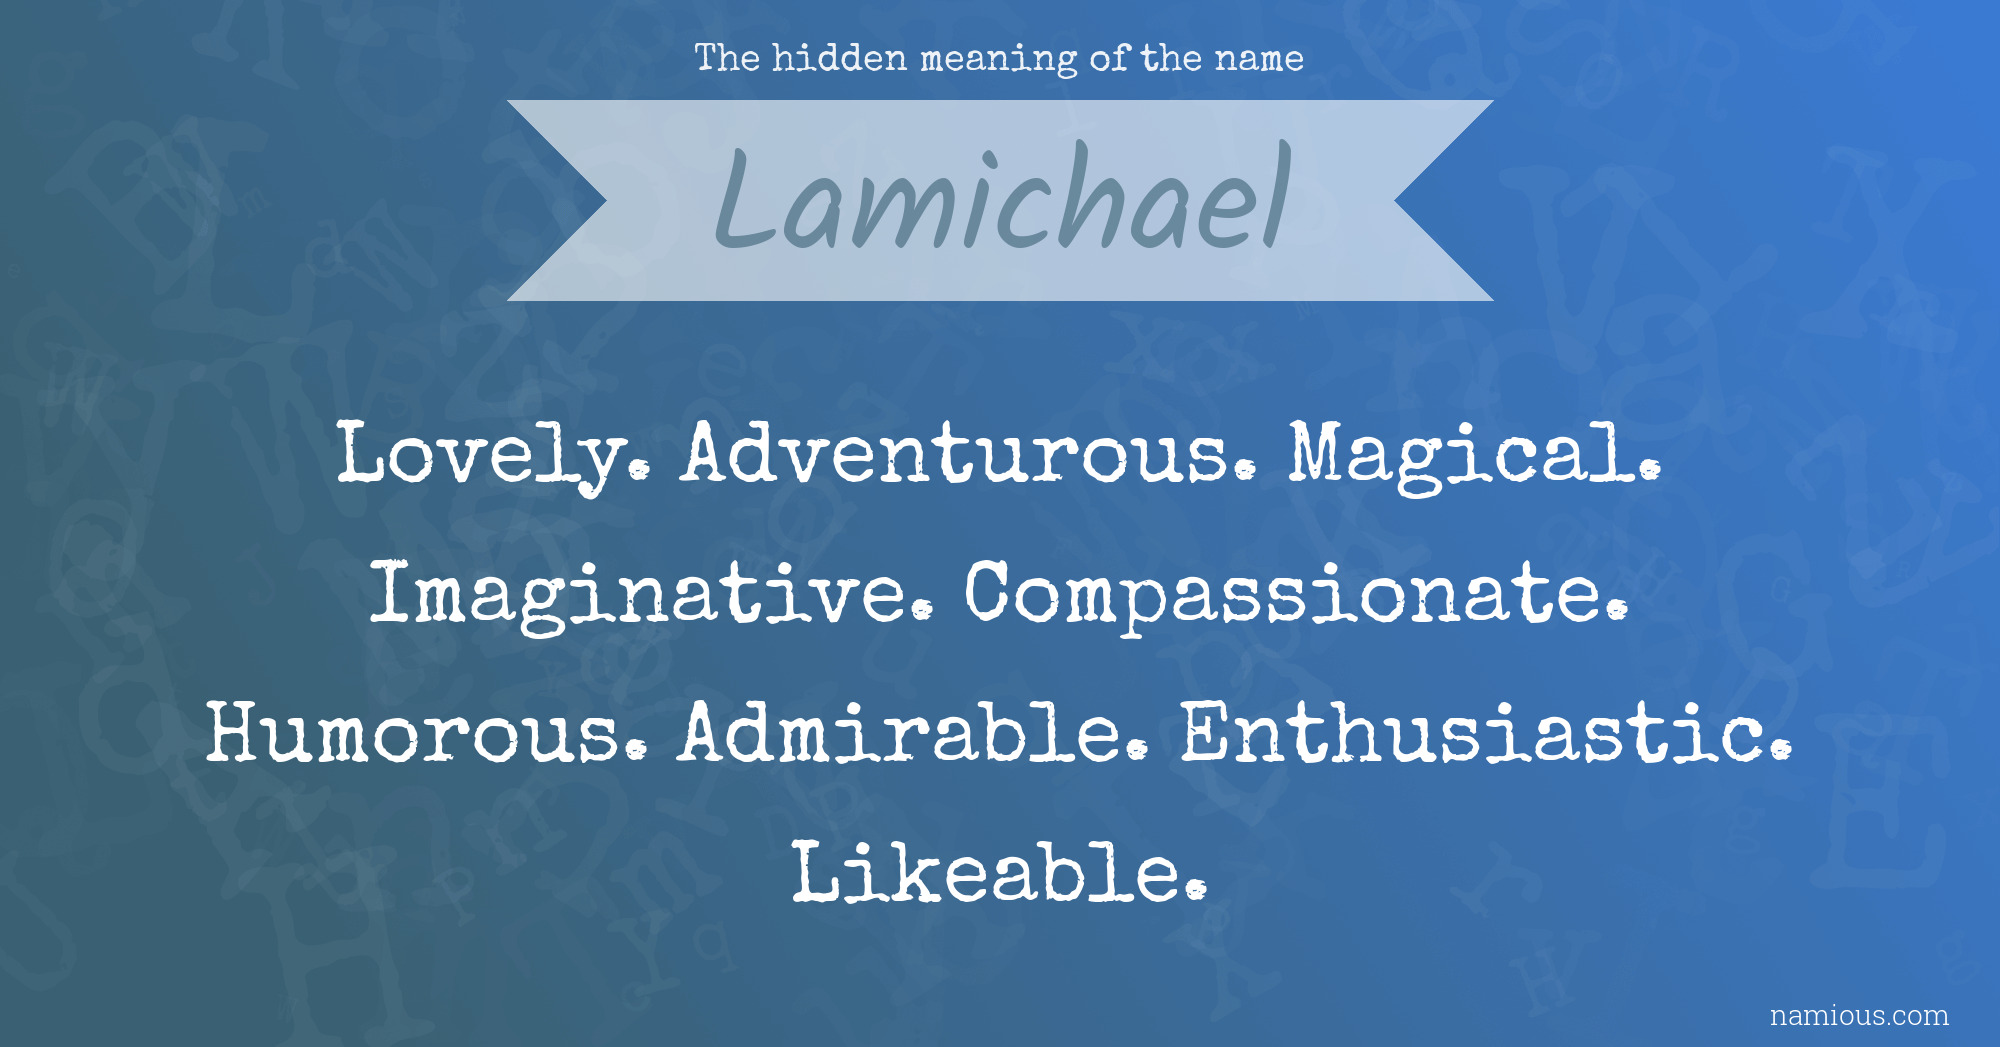 The hidden meaning of the name Lamichael